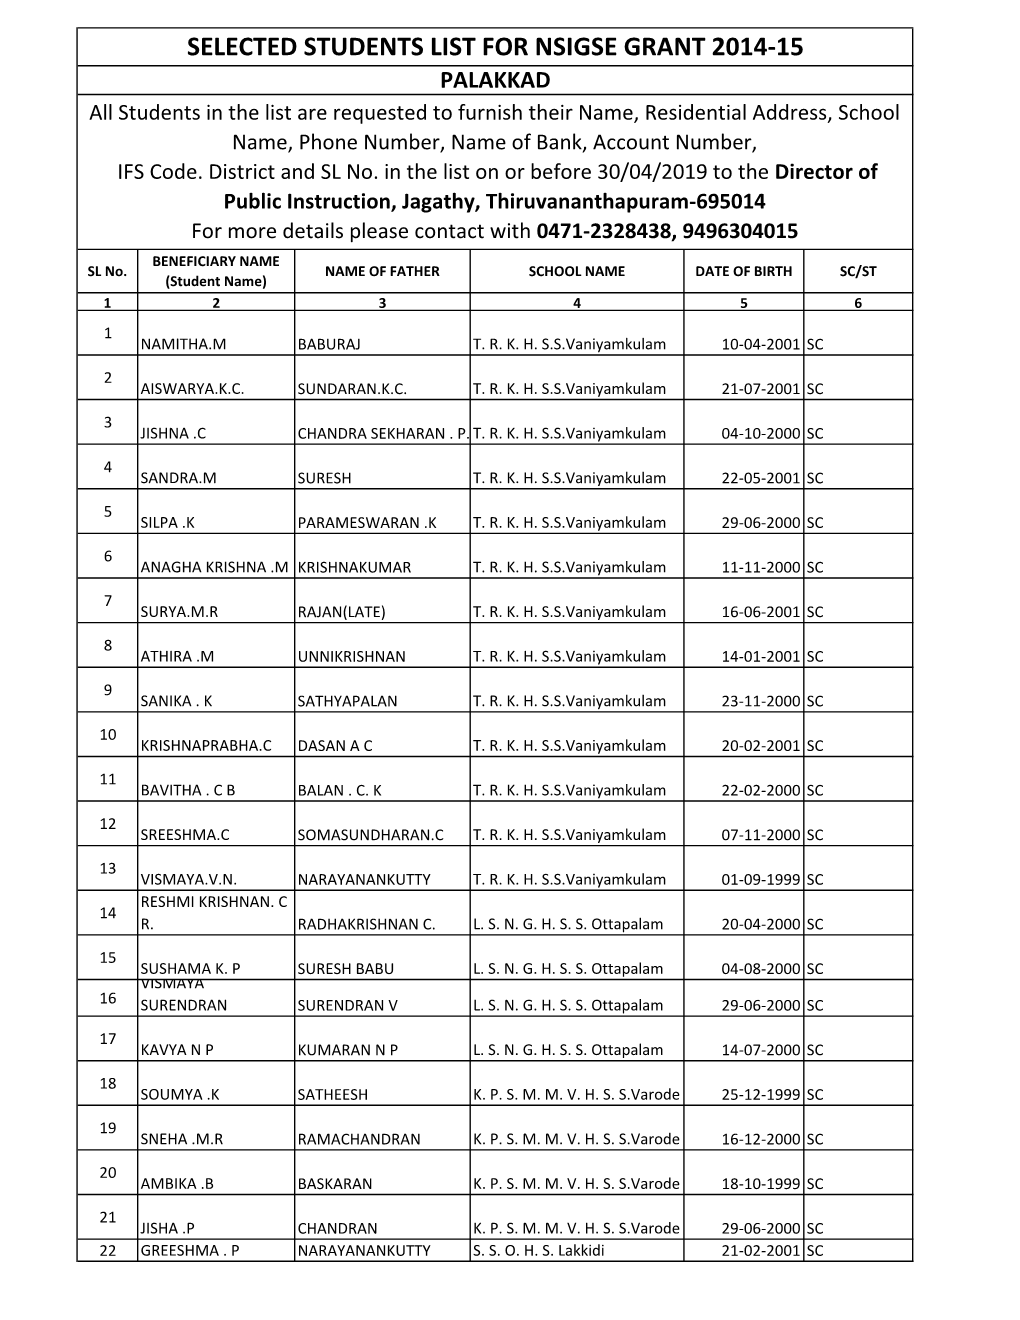 Selected Students List for Nsigse Grant 2014-15